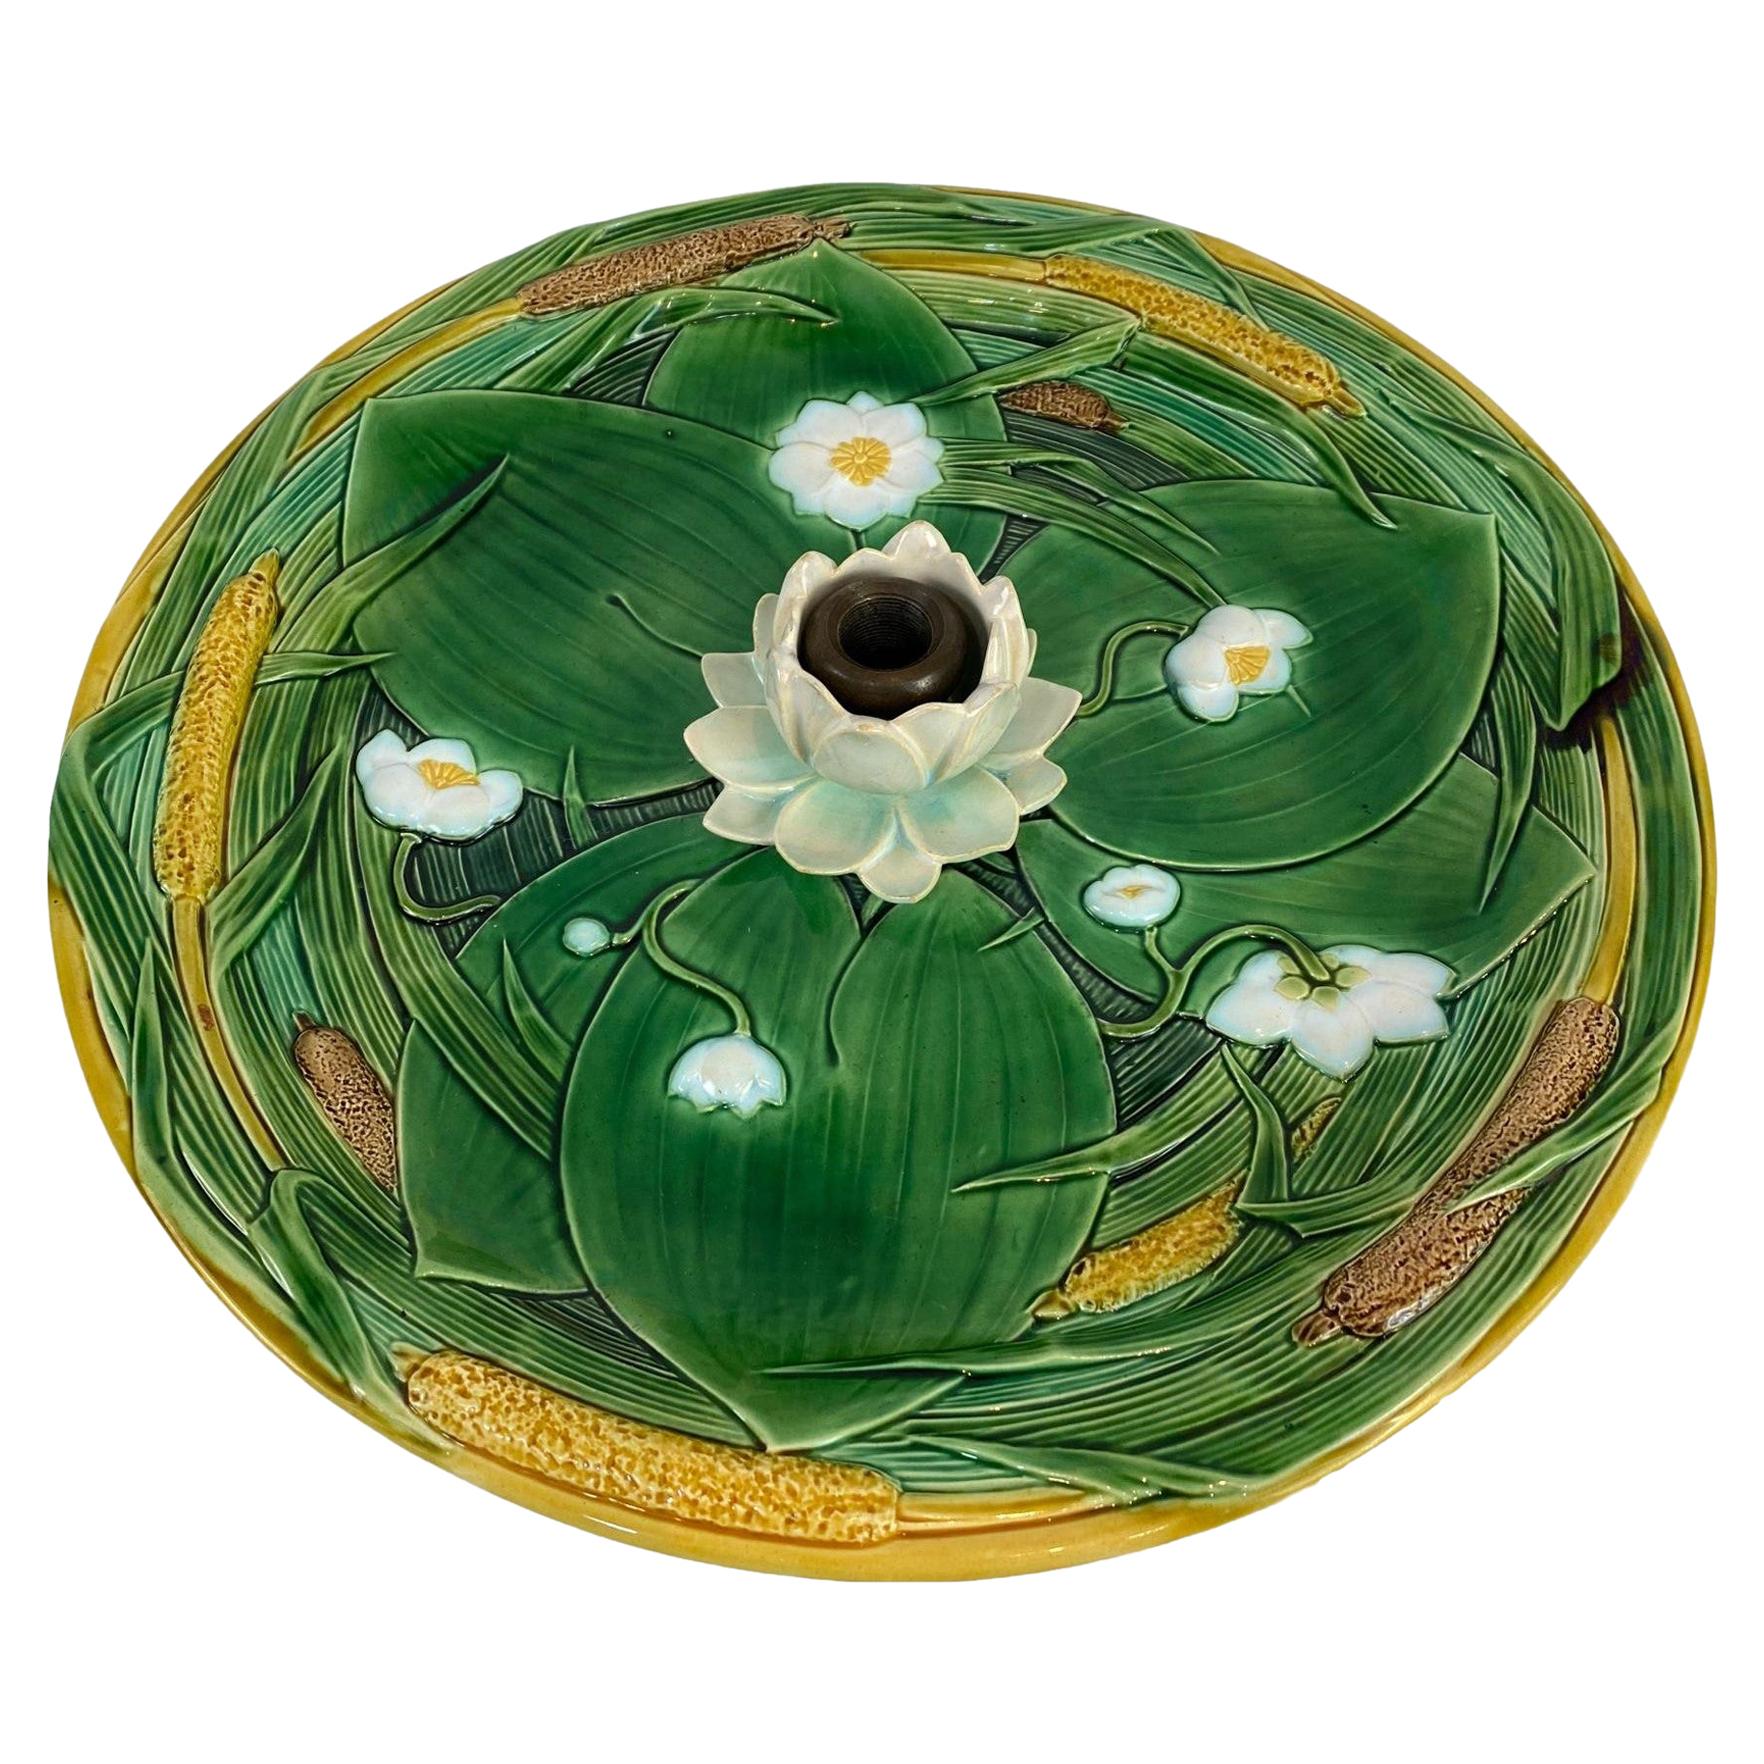 Minton Majolica Centerpiece Tray 15-in, Lotus Flower on Green Ground, Dated 1863